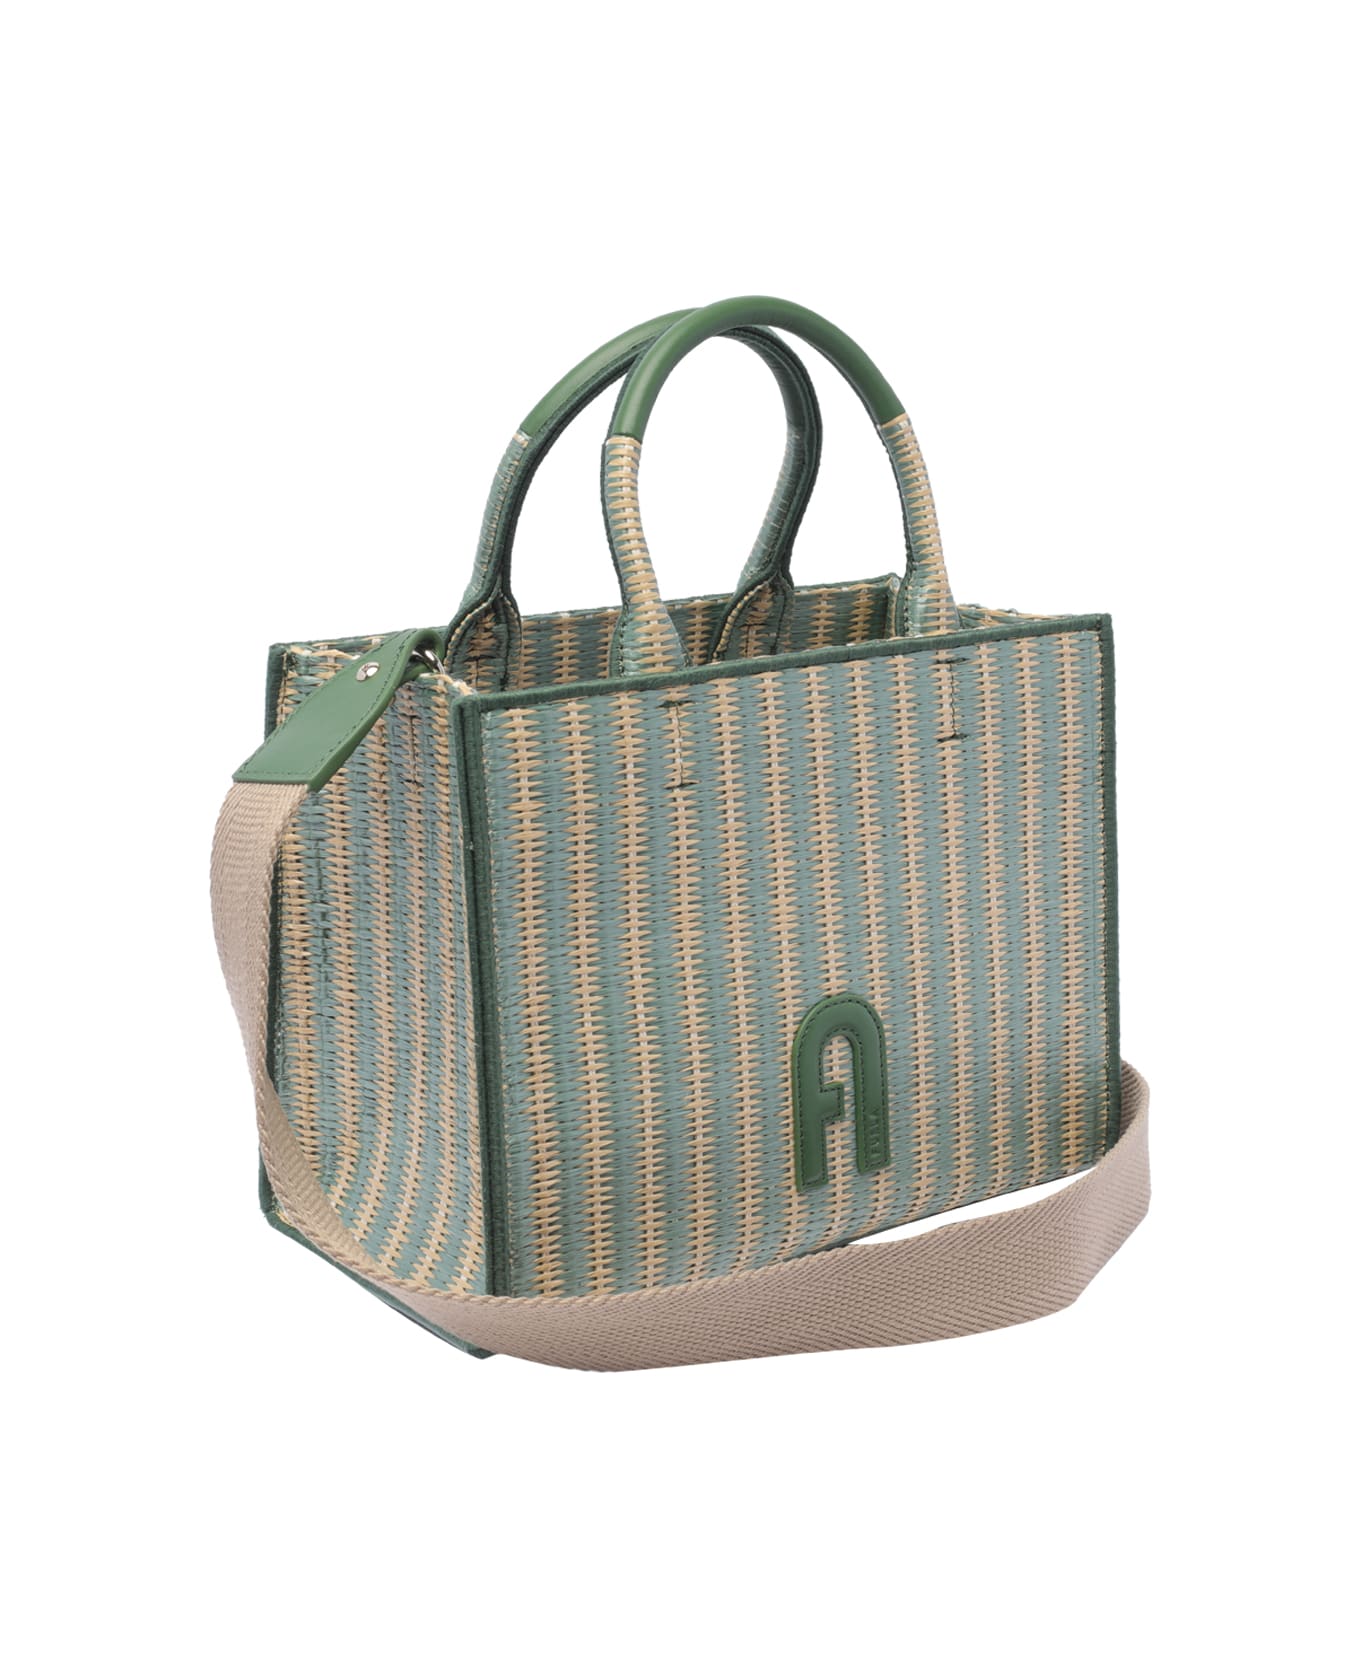 Furla Opportunity Tote Bag - Green